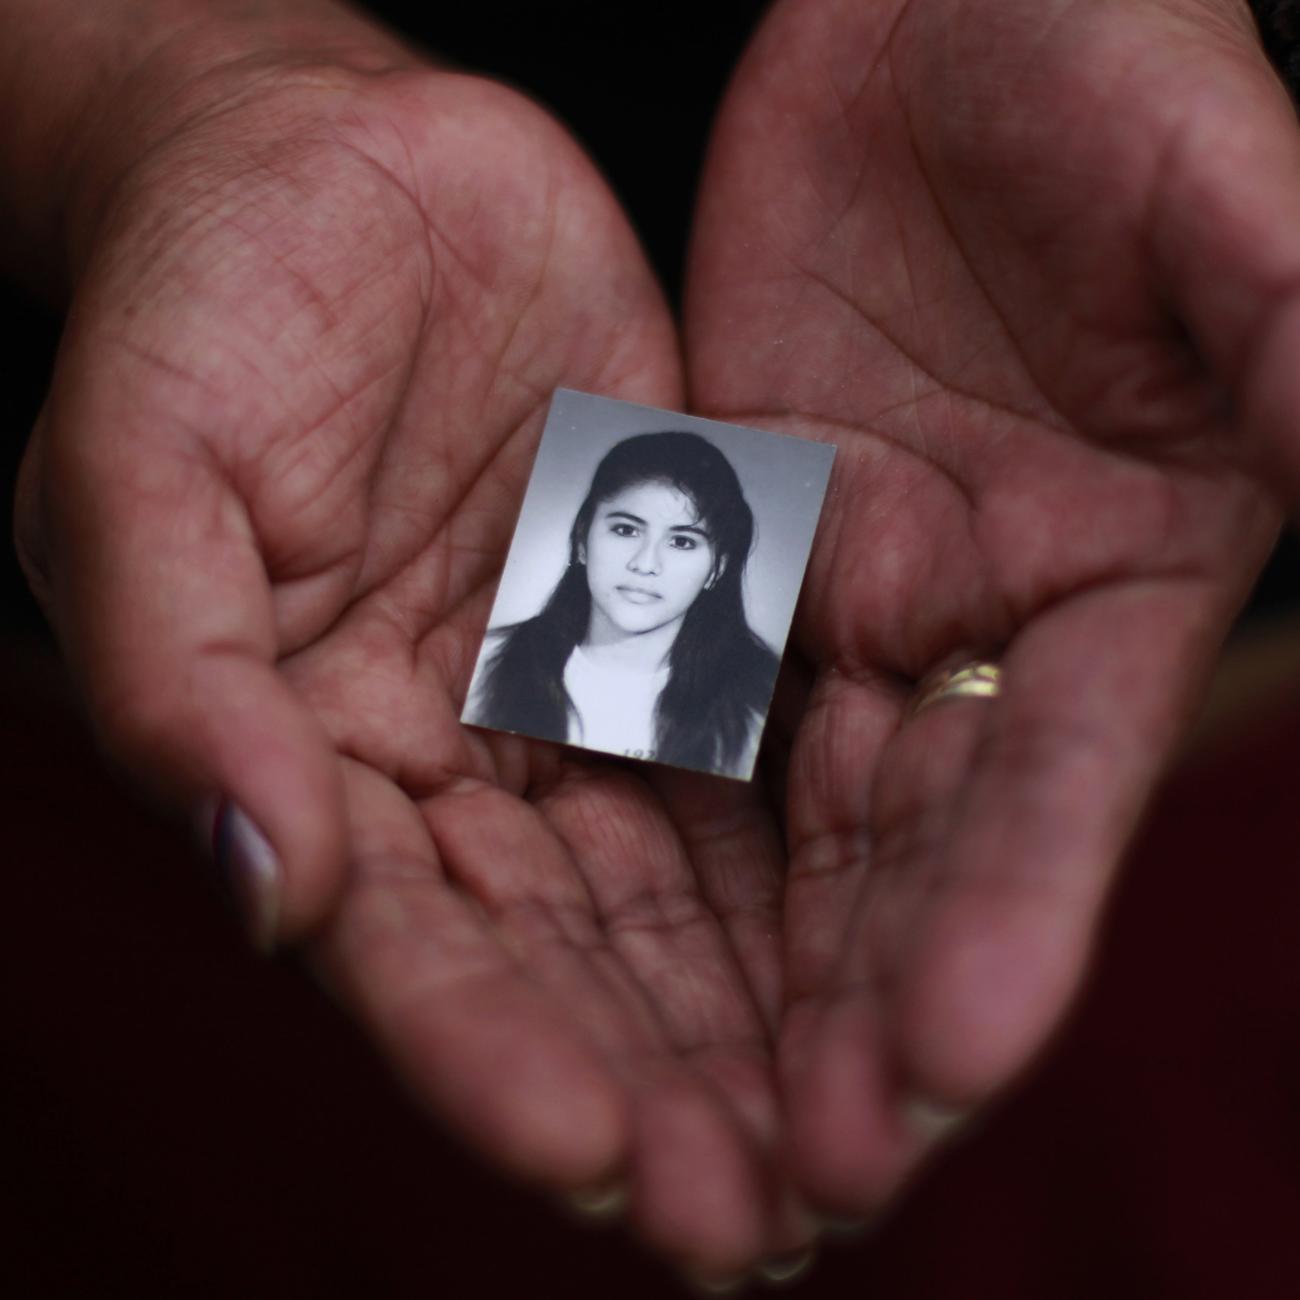 A family member holds a photograph of Rosivel Elisabeth Grande in Quezaltepeque, Honduras, on July 2, 2013. Grande was killed by an unidentified man who shot her five times when she was going to work 